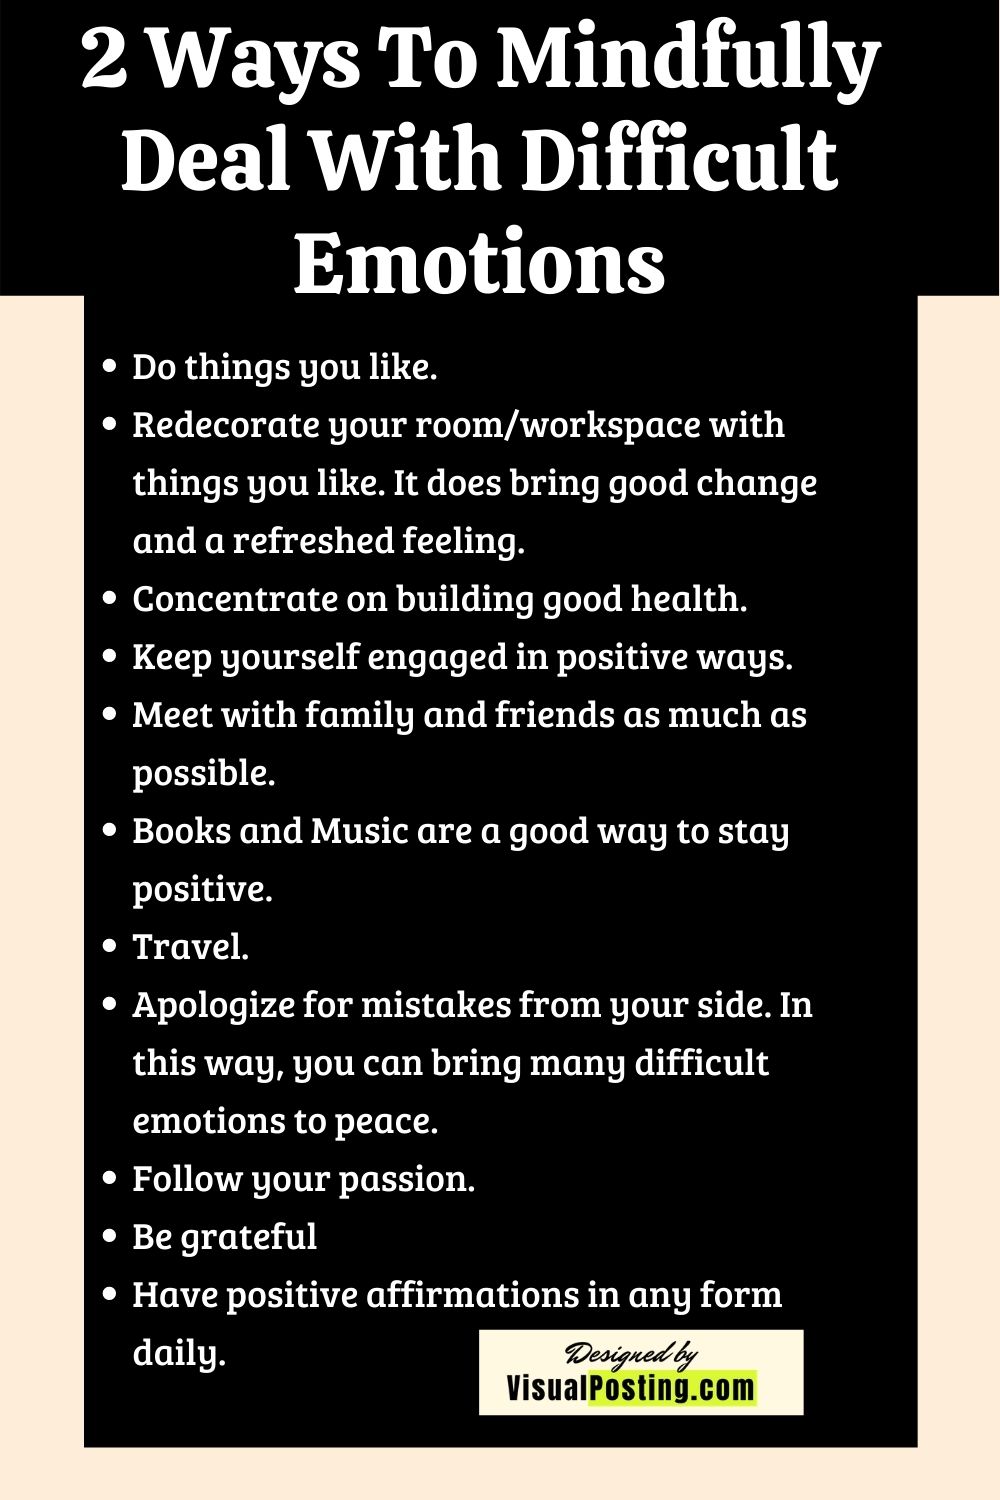 2 ways to mindfully deal with difficult emotions.jpg